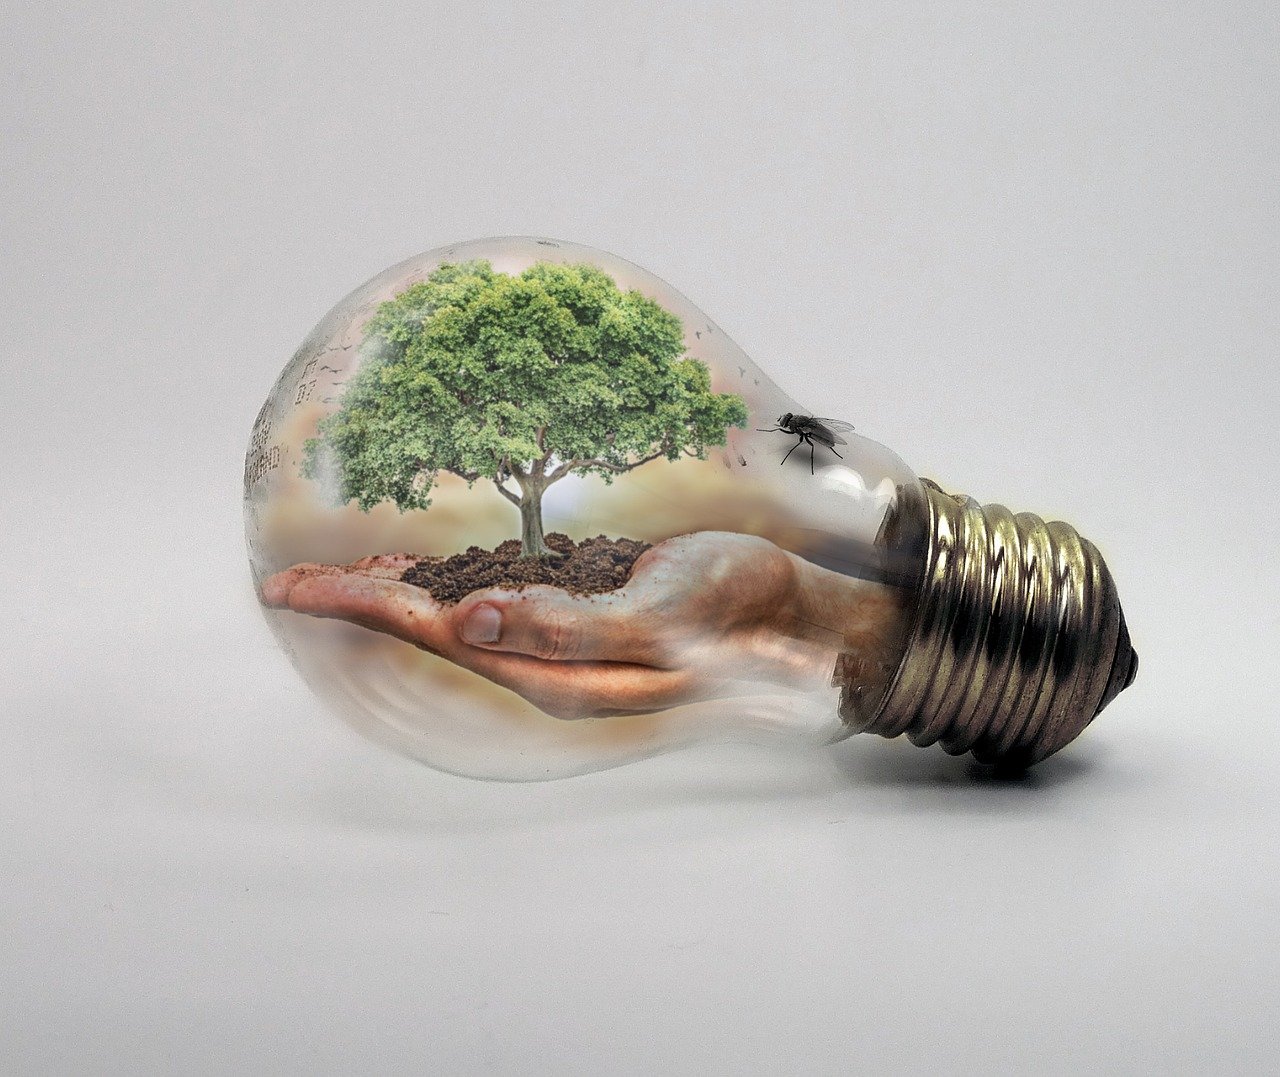 Hand with a green tree growing out of the palm, inside a lightbulb on a white background